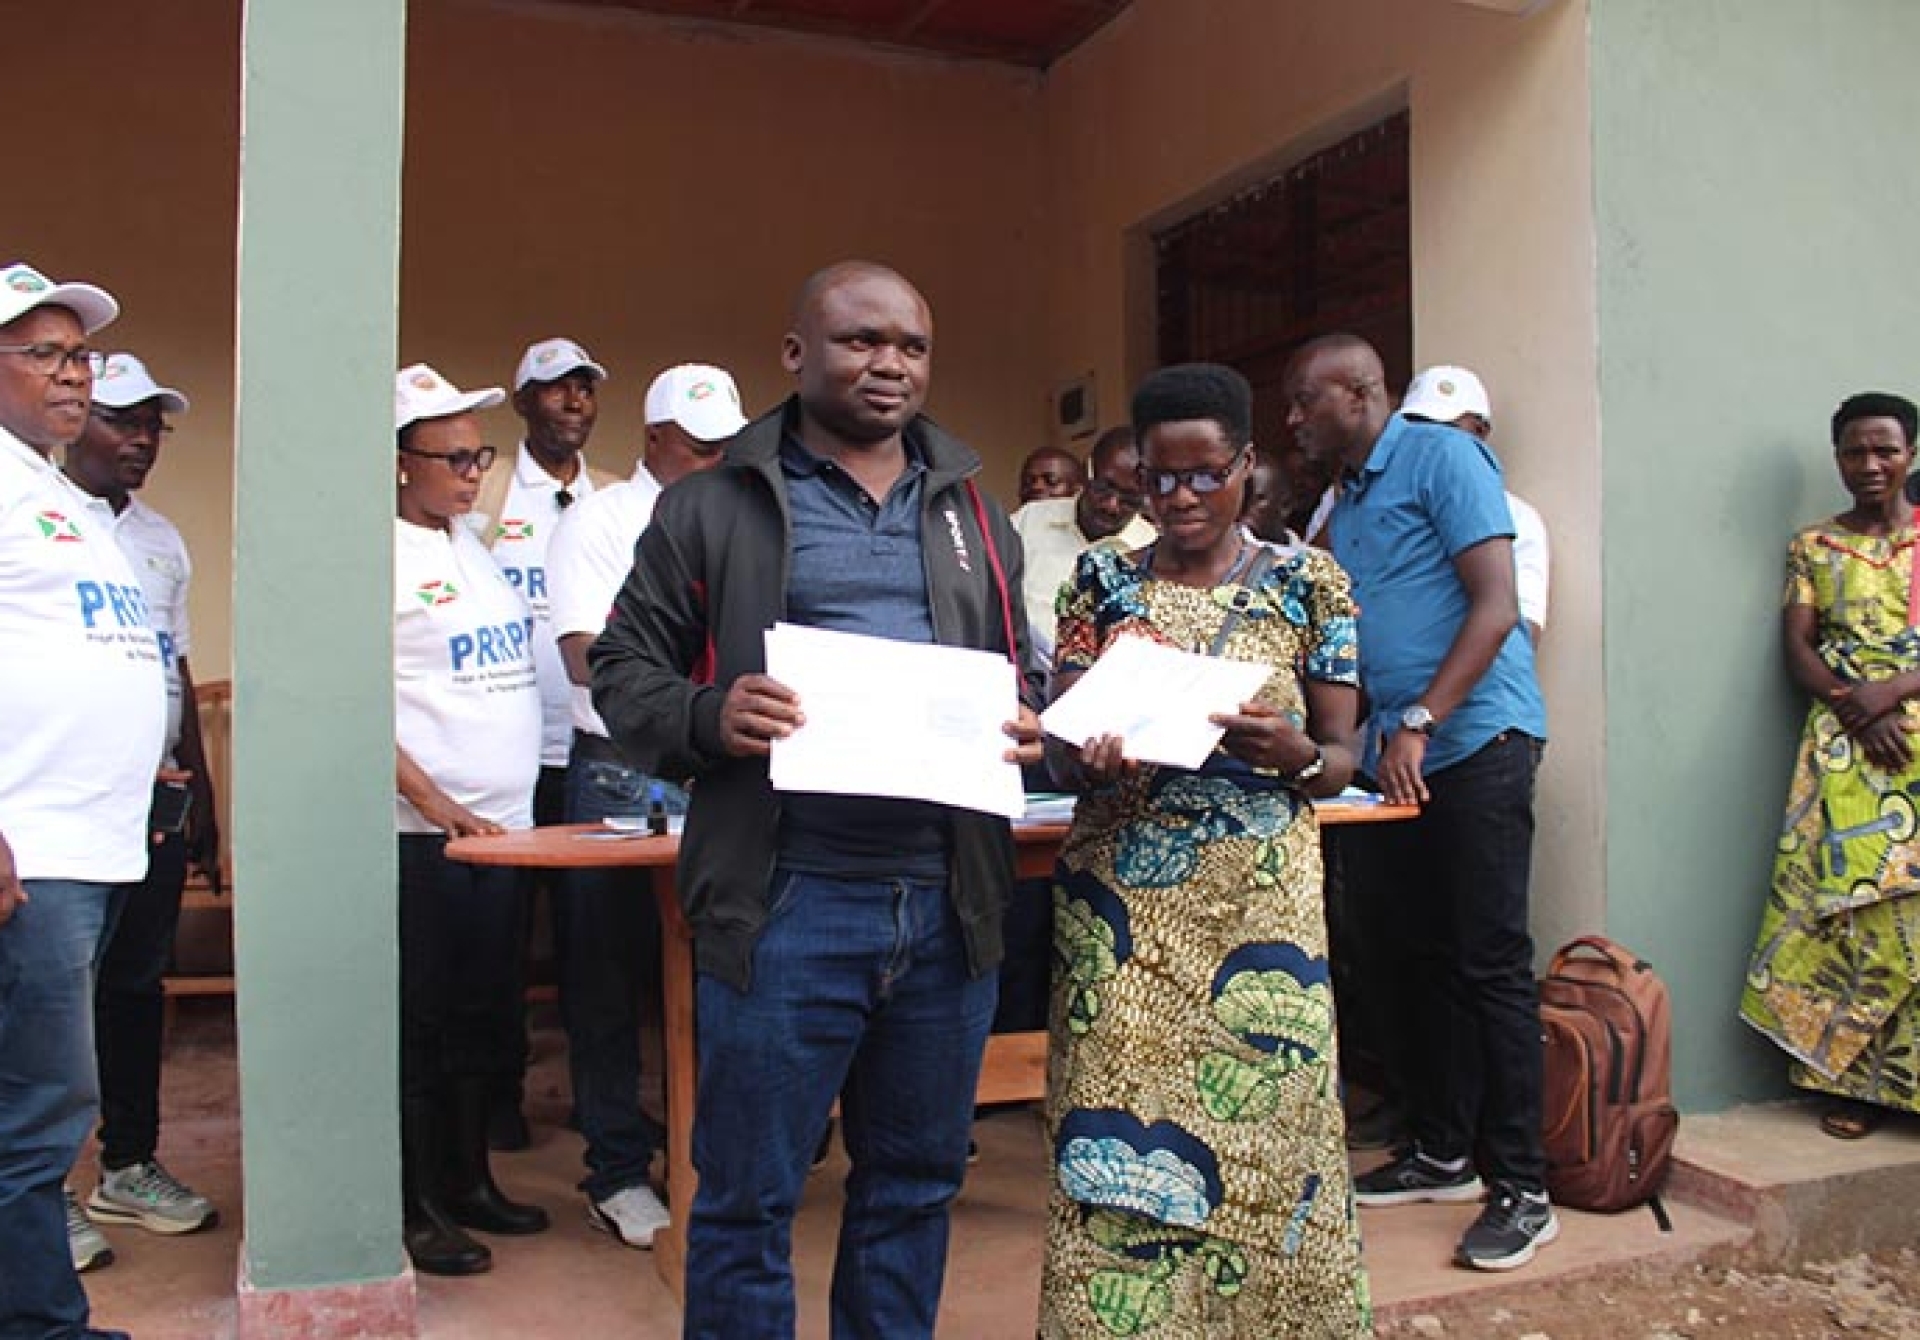 HANDING OVER OF LAND CERTIFICATES DURING A SUPERVISORY MISSION BY THE WORLD BANK AND ITS PARTNERS  